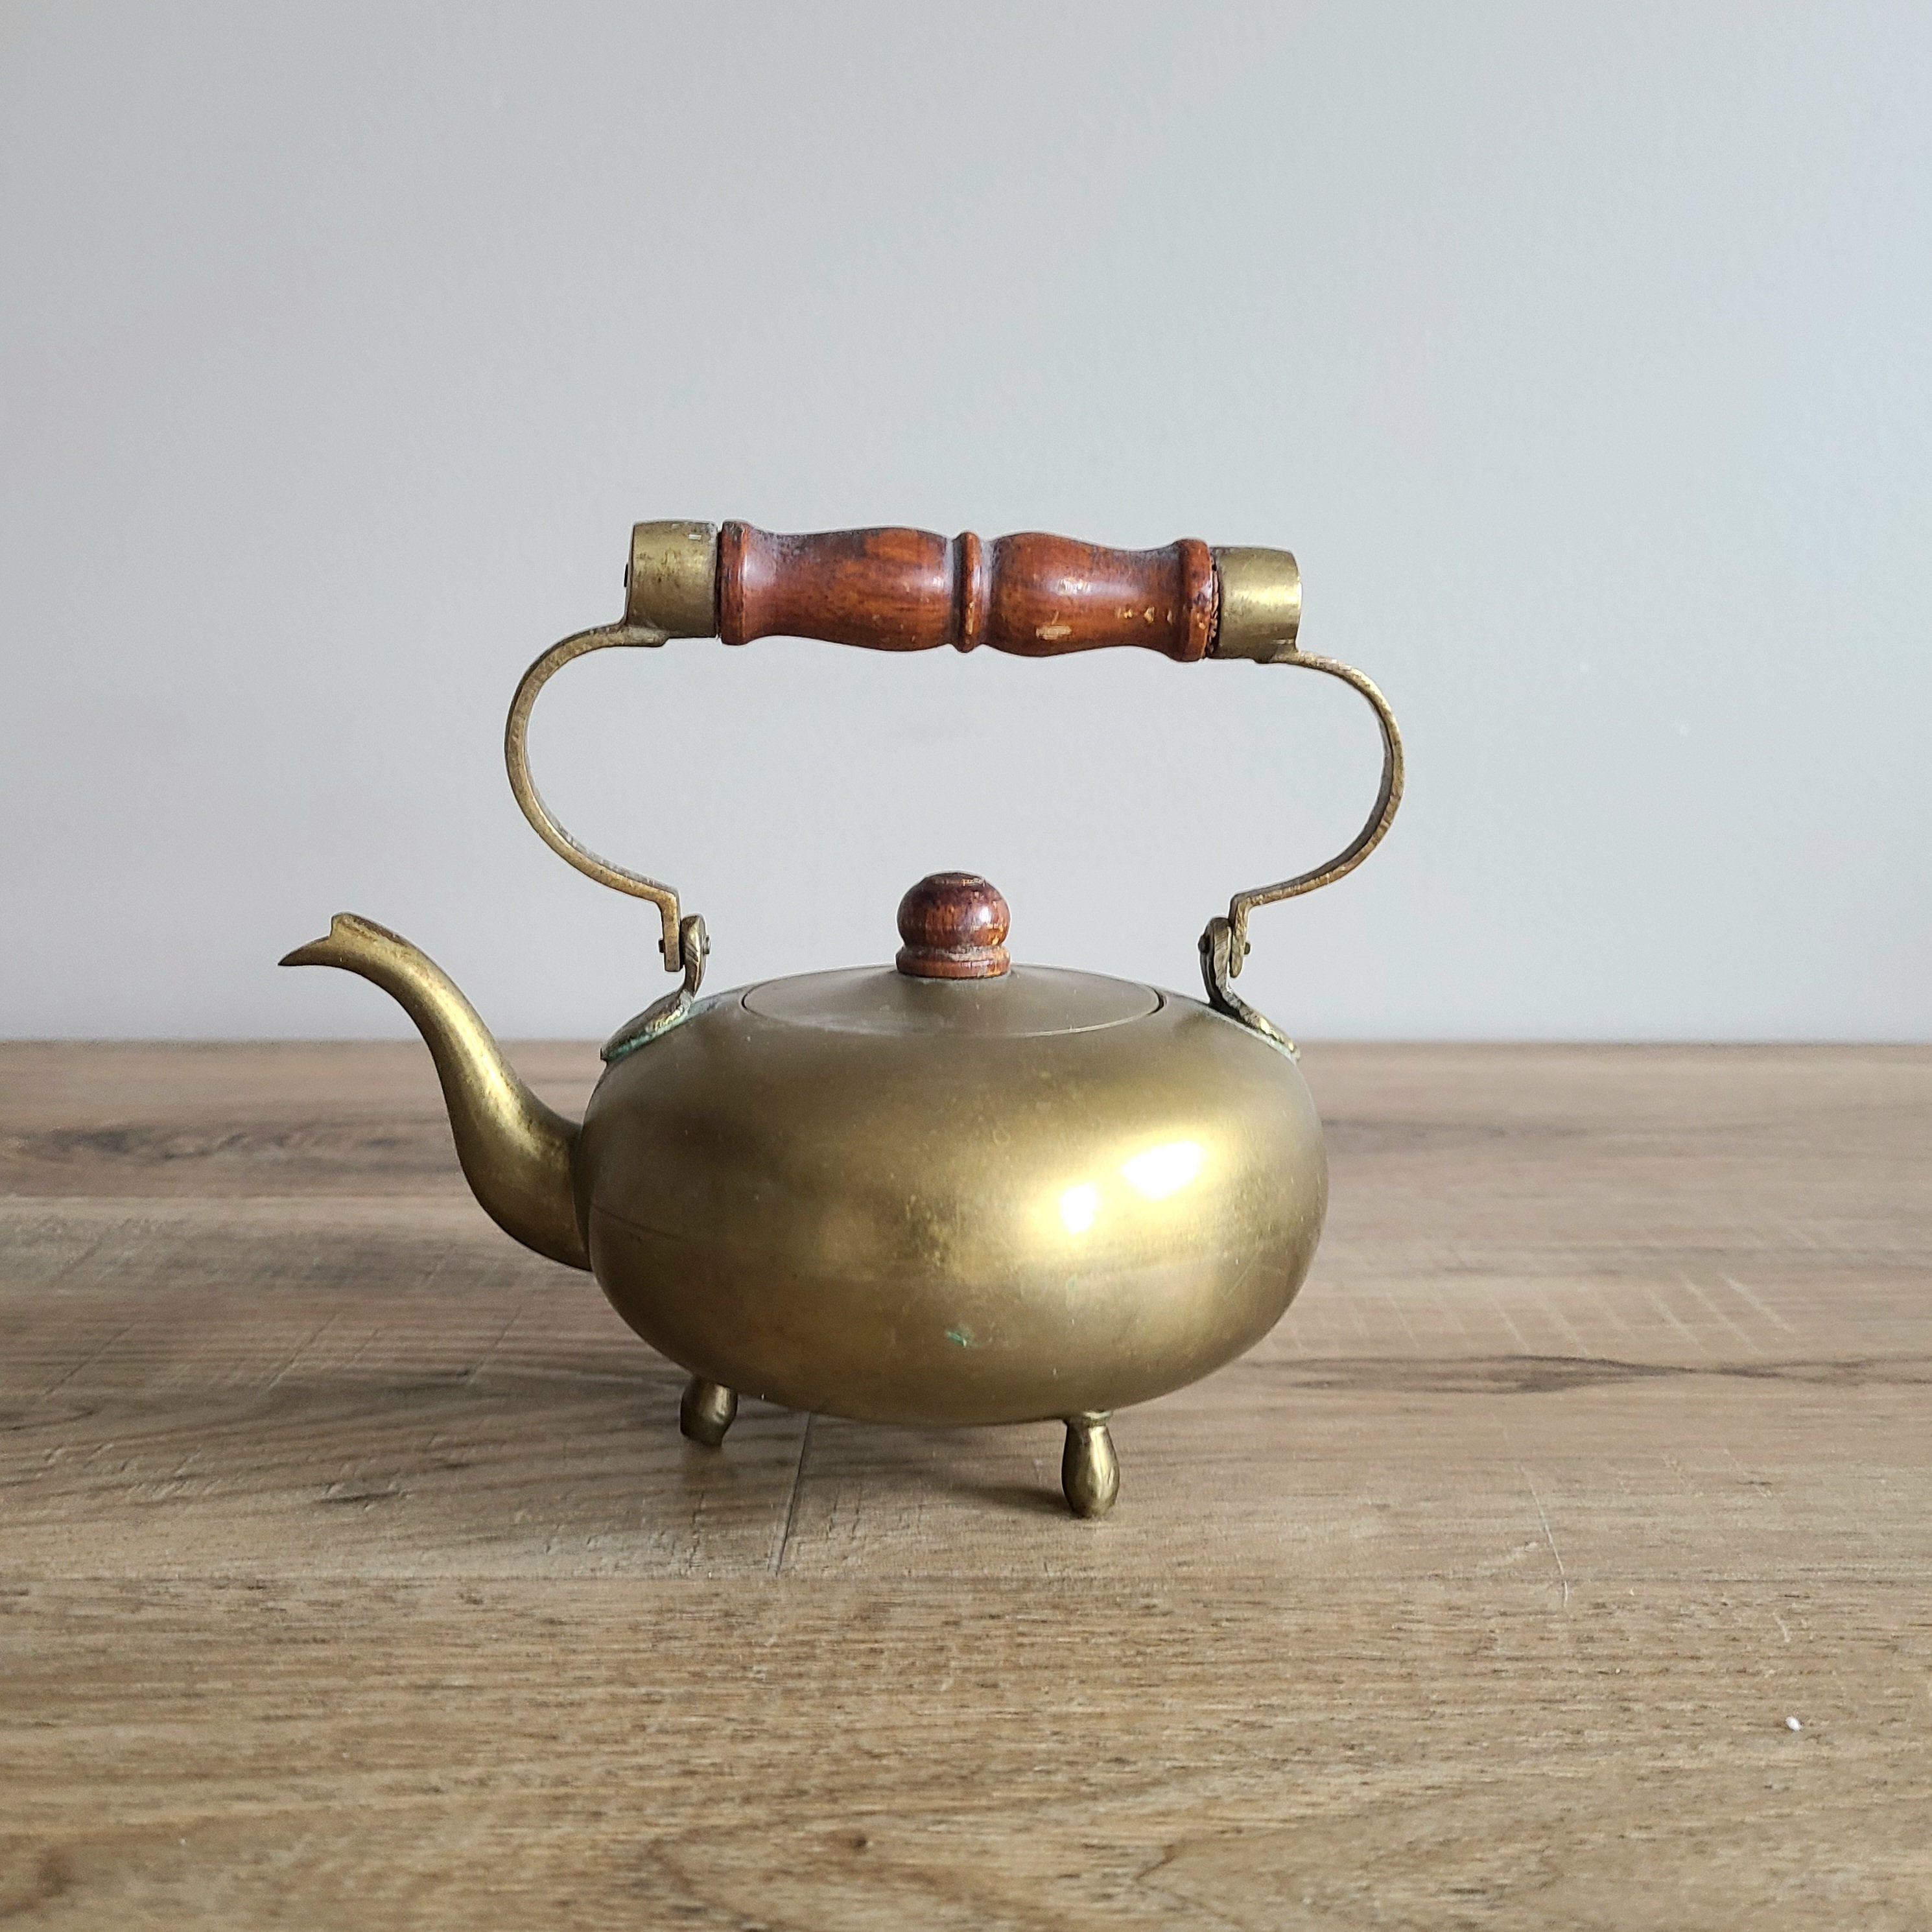 Buy Marwar Handicraft Vintage Old Brass Tea and Coffee Kettle for Home  Decor  Solid Brass Teapot for Kitchen Decor. Online at Low Prices in India  